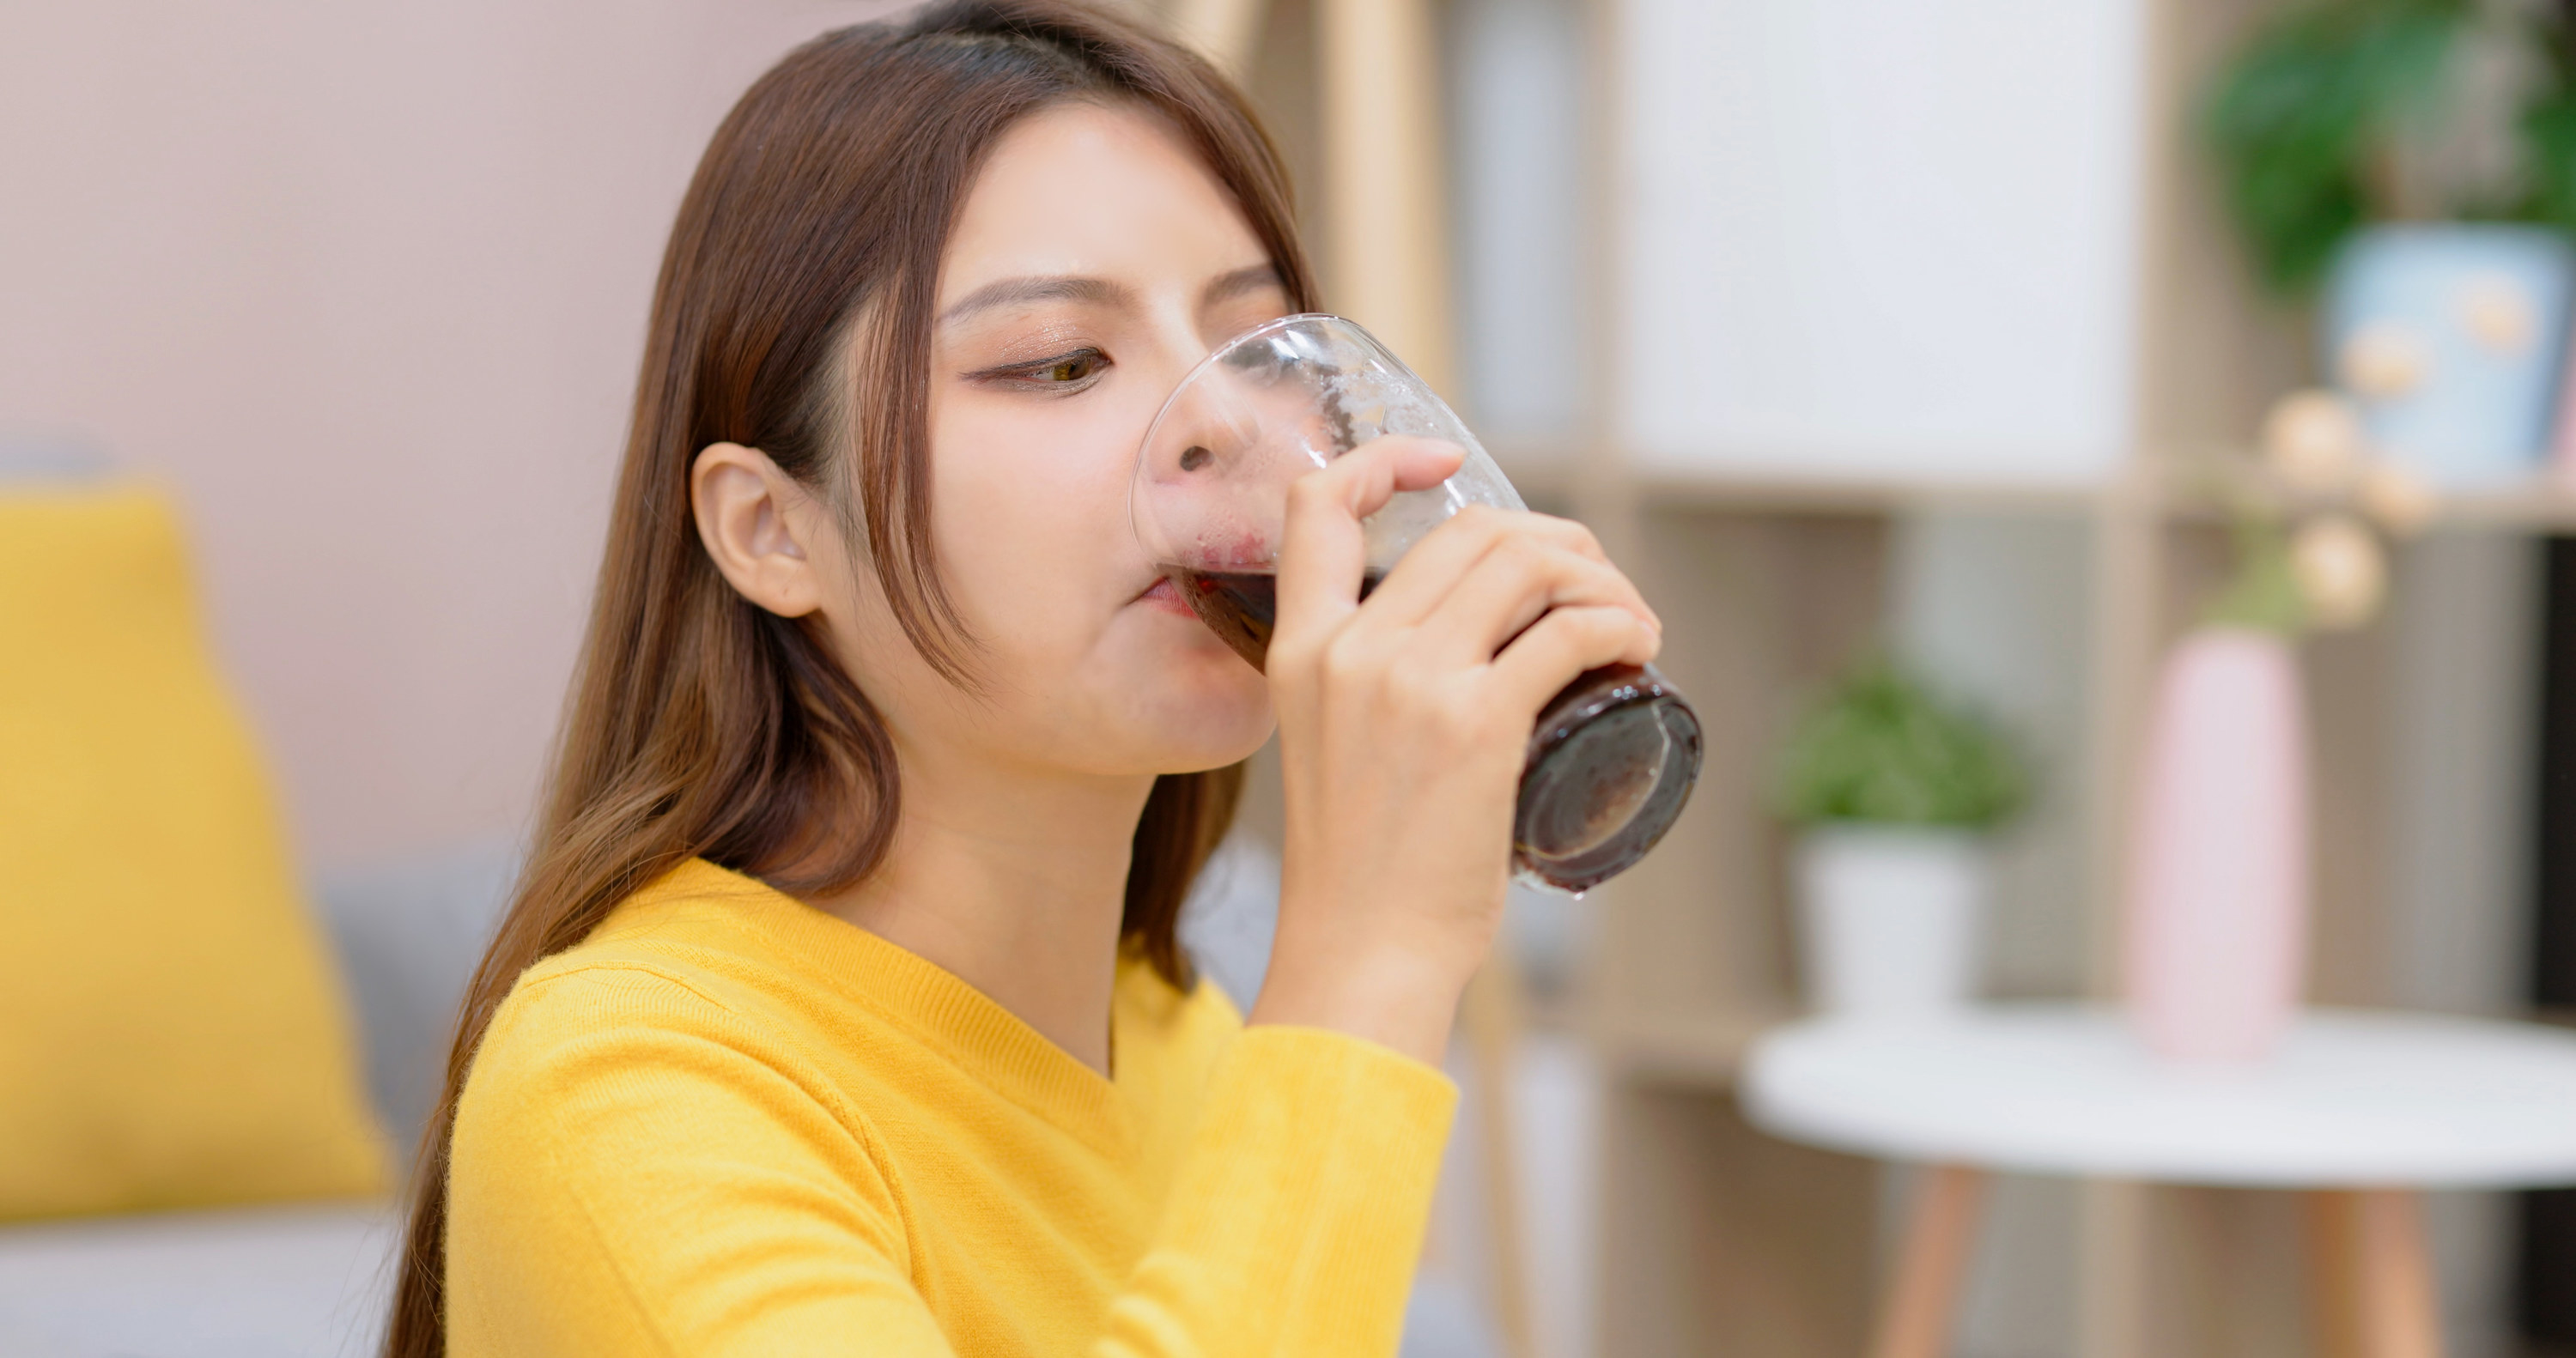 A young woman drinking soda from a glass